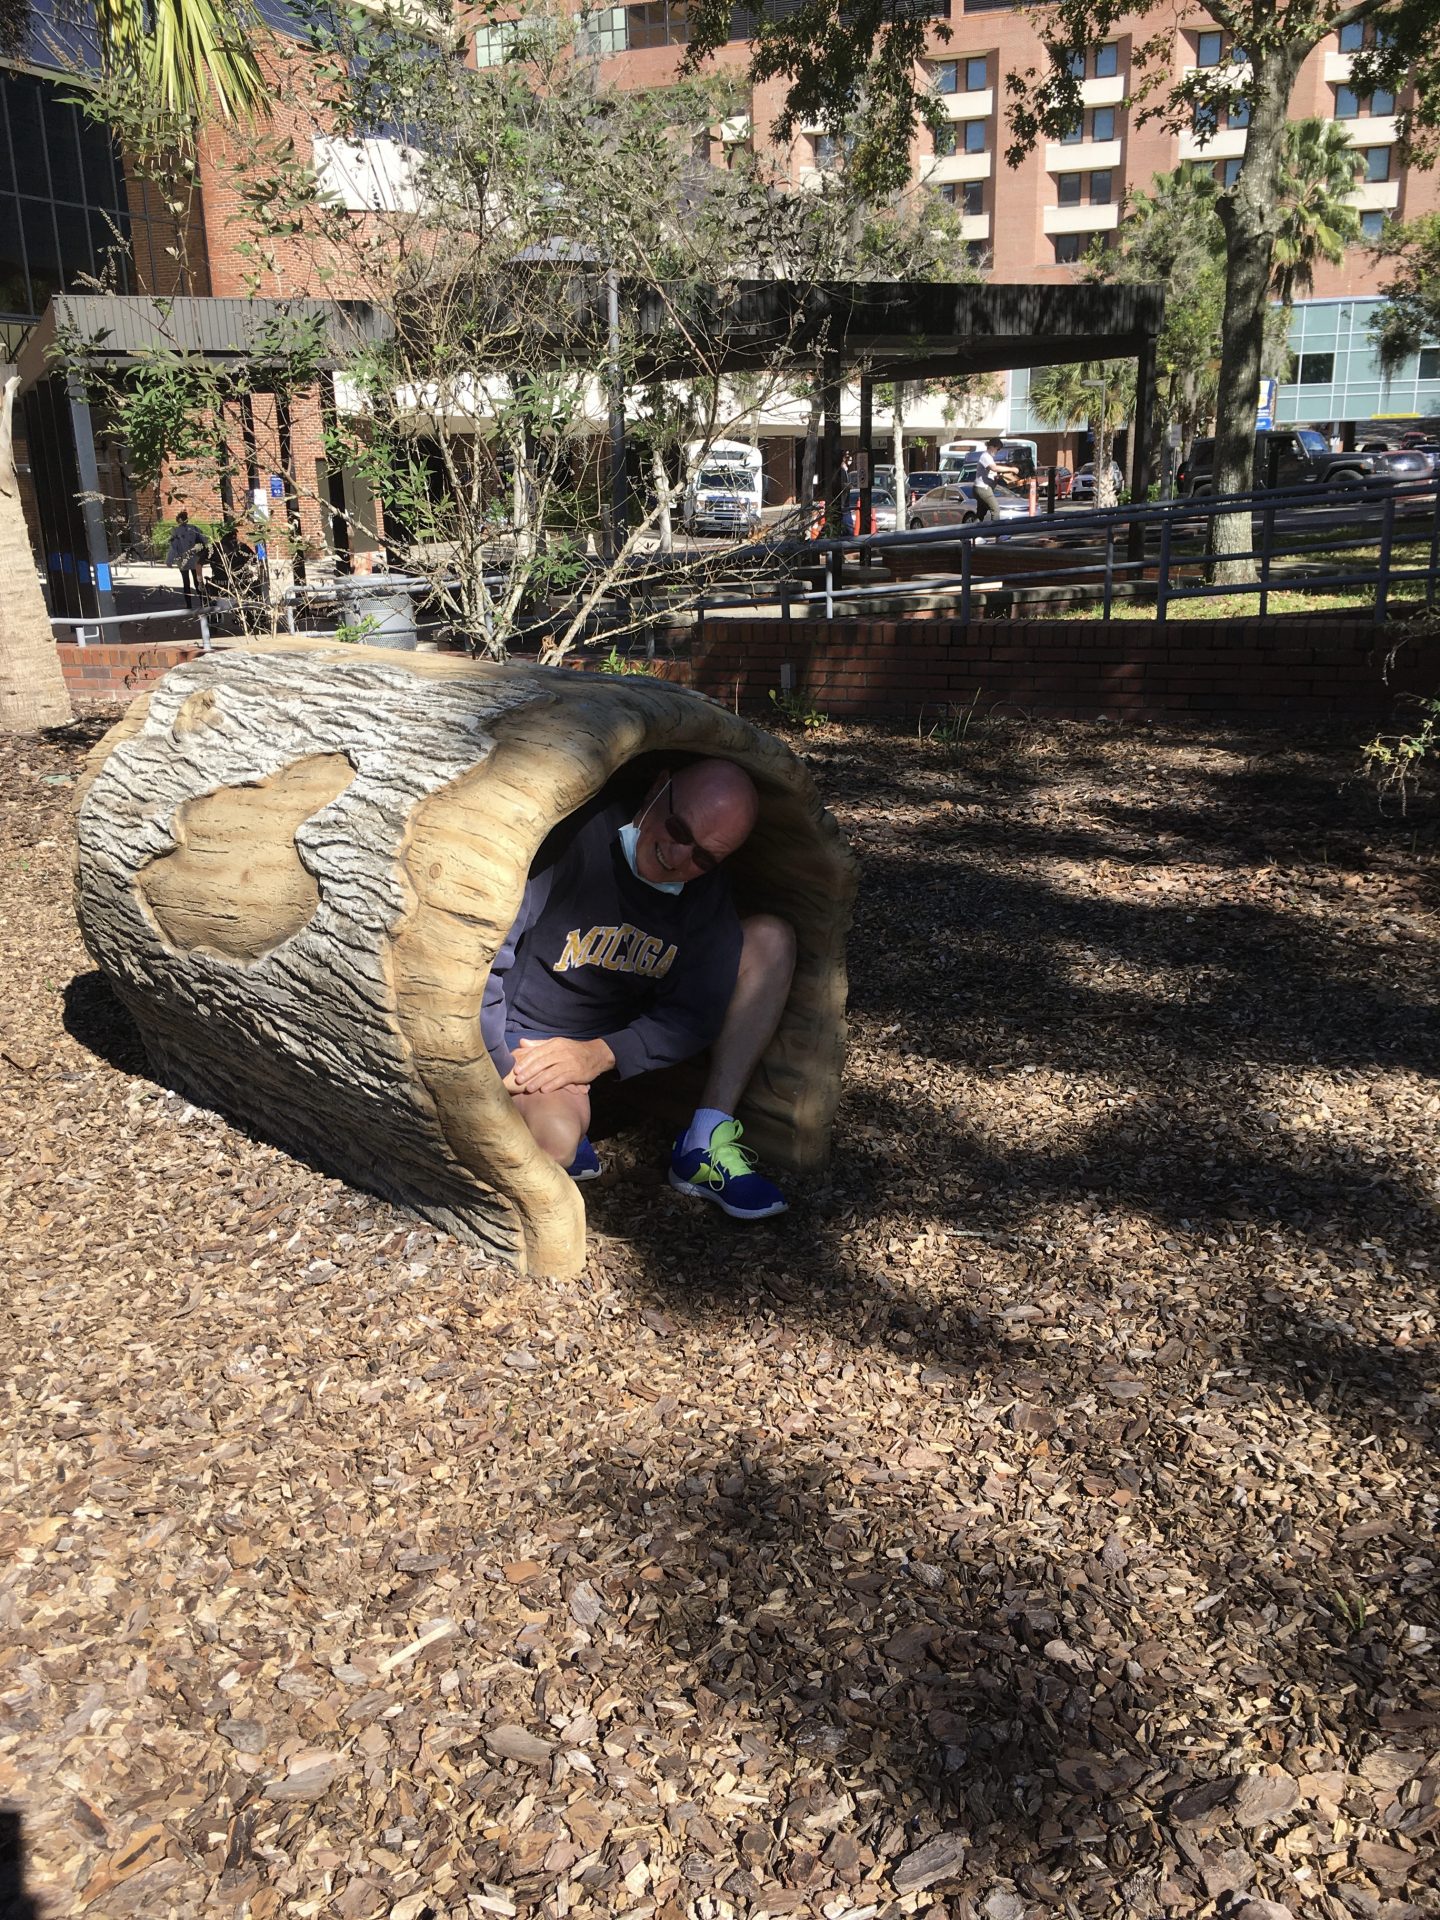 Russ spent a week at Shands for evaluation of double lung transplant,  but even so couldn’t resist getting inside this playground log there, like the cute Chipmunk that he was!